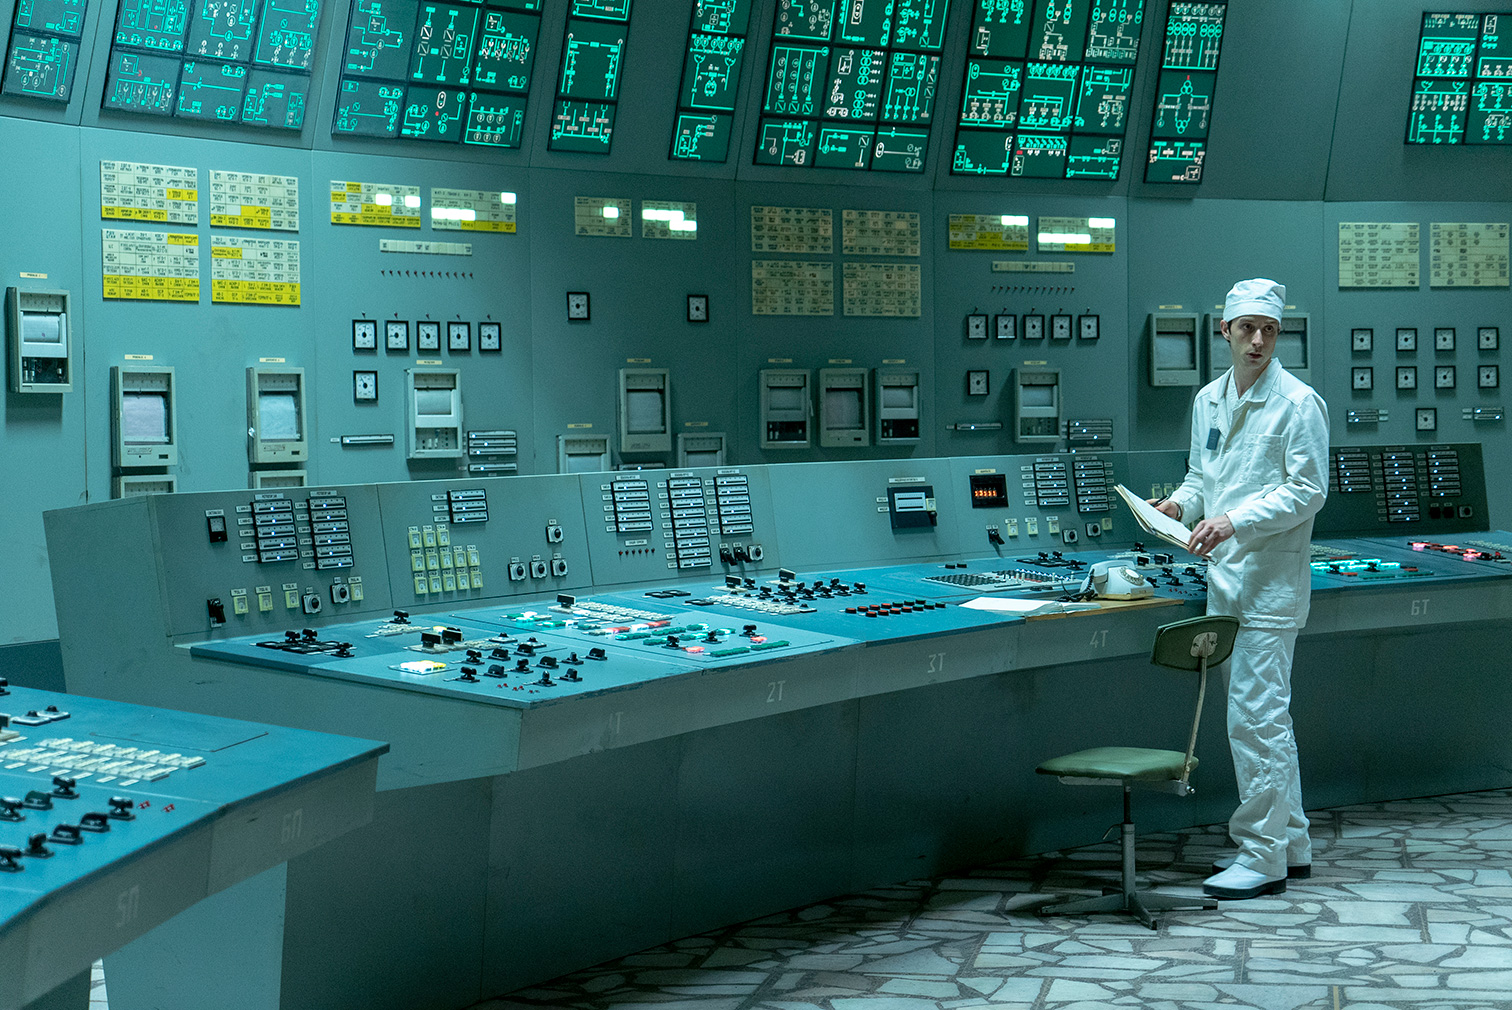 Fortum Nuclear Plant Uses VR For Control Training - VRScout